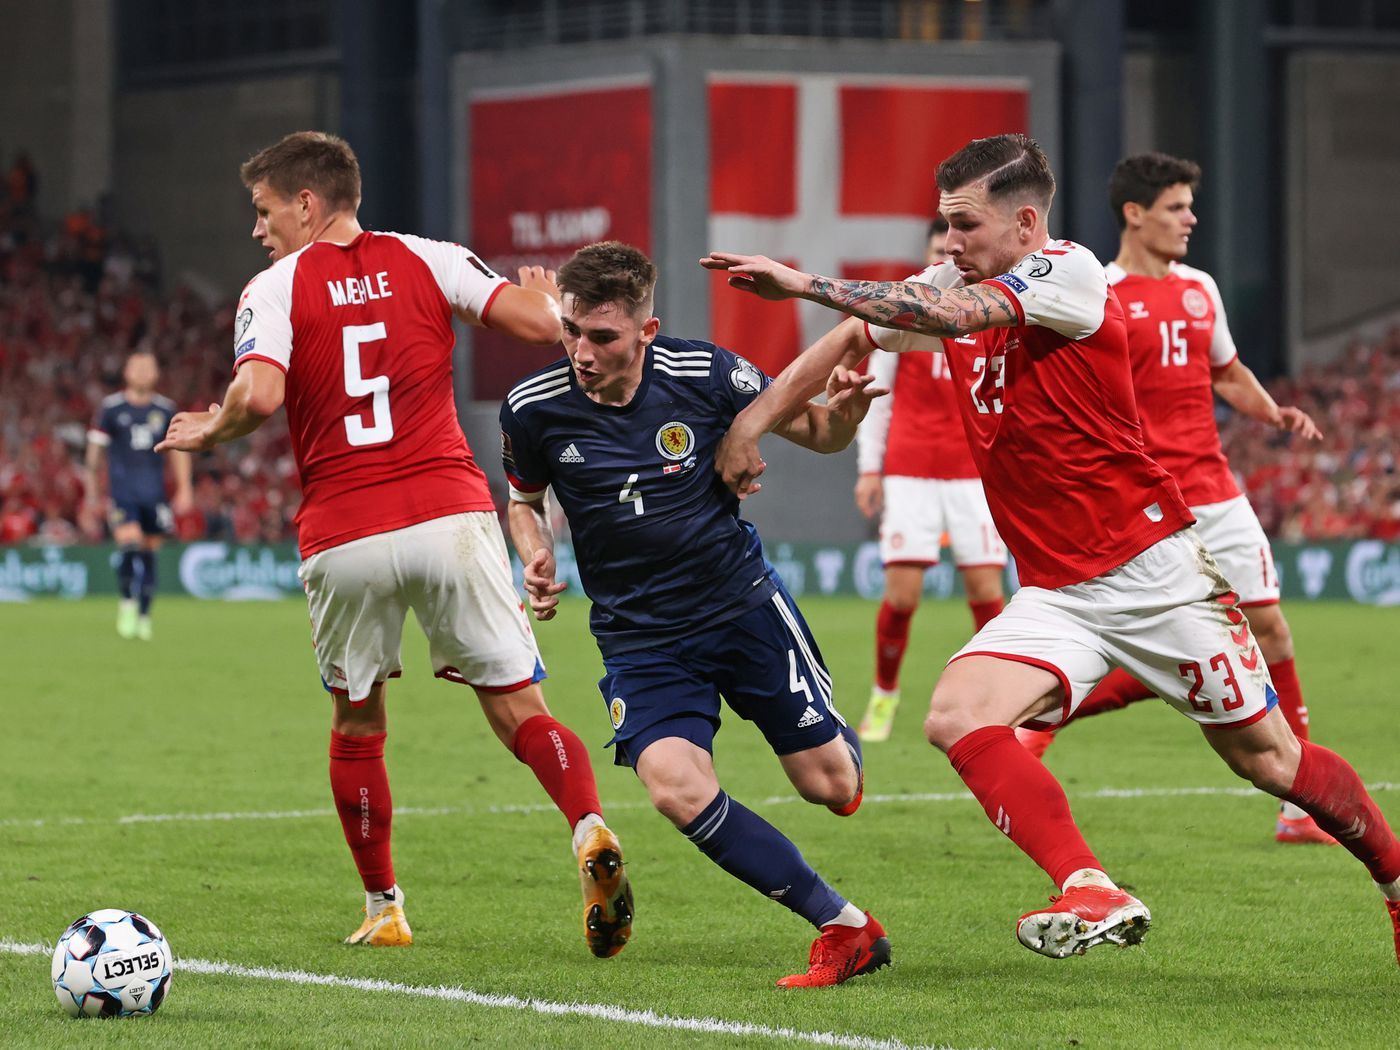 Scotland - Denmark: Bets and Odds for the match on November 15